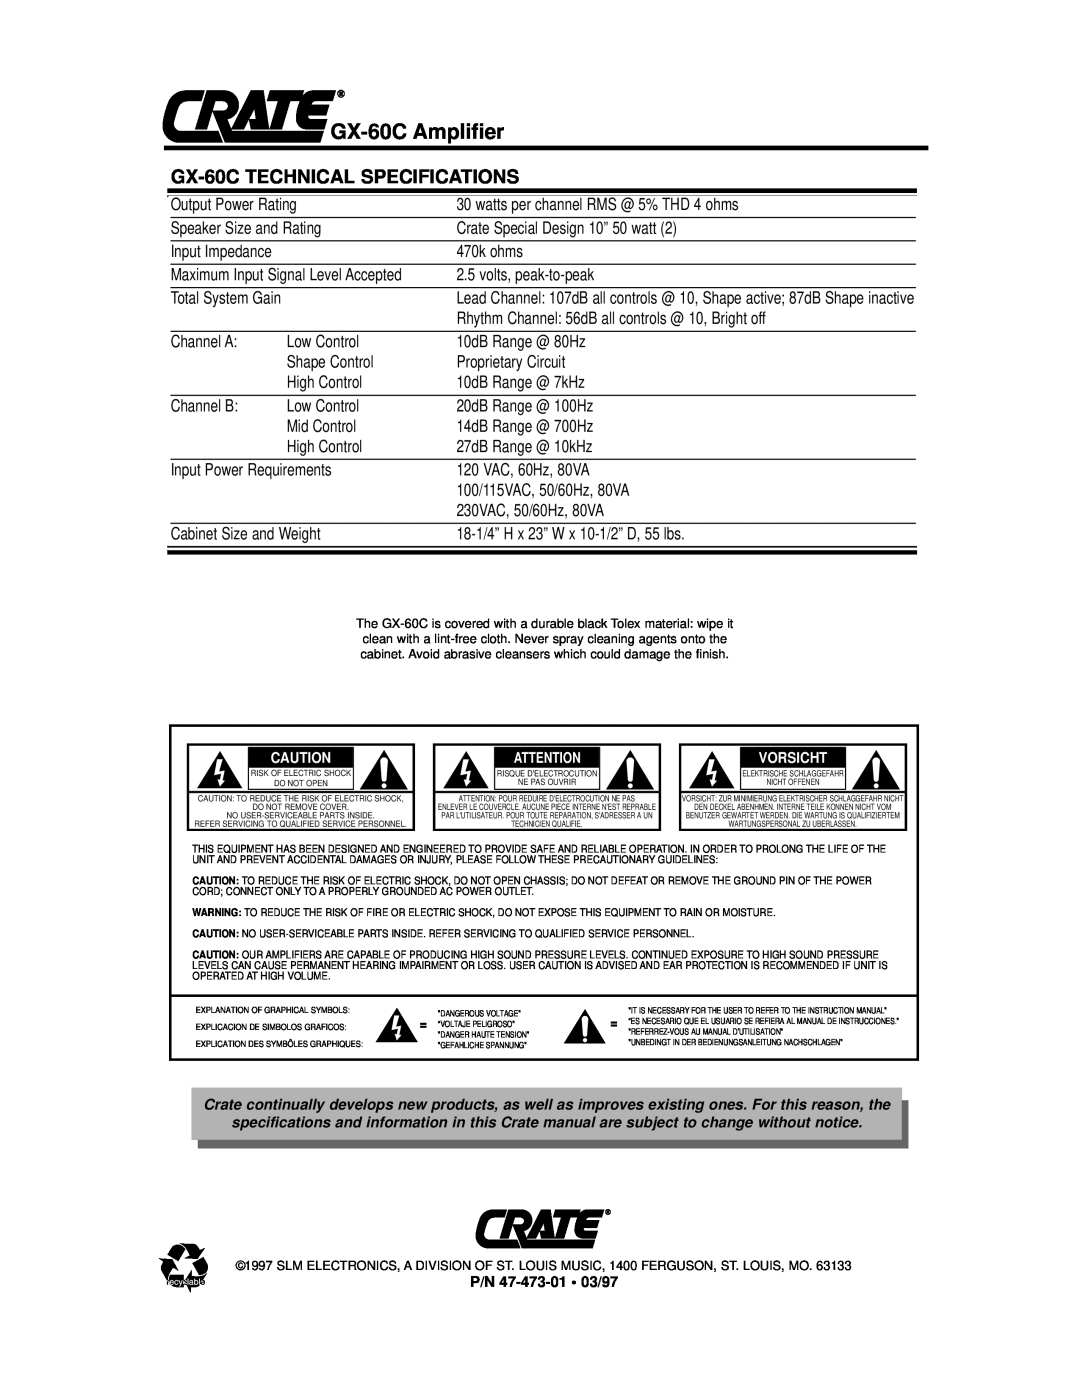 Crate Amplifiers owner manual GX-60CTECHNICAL SPECIFICATIONS, GX-60CAmplifier 